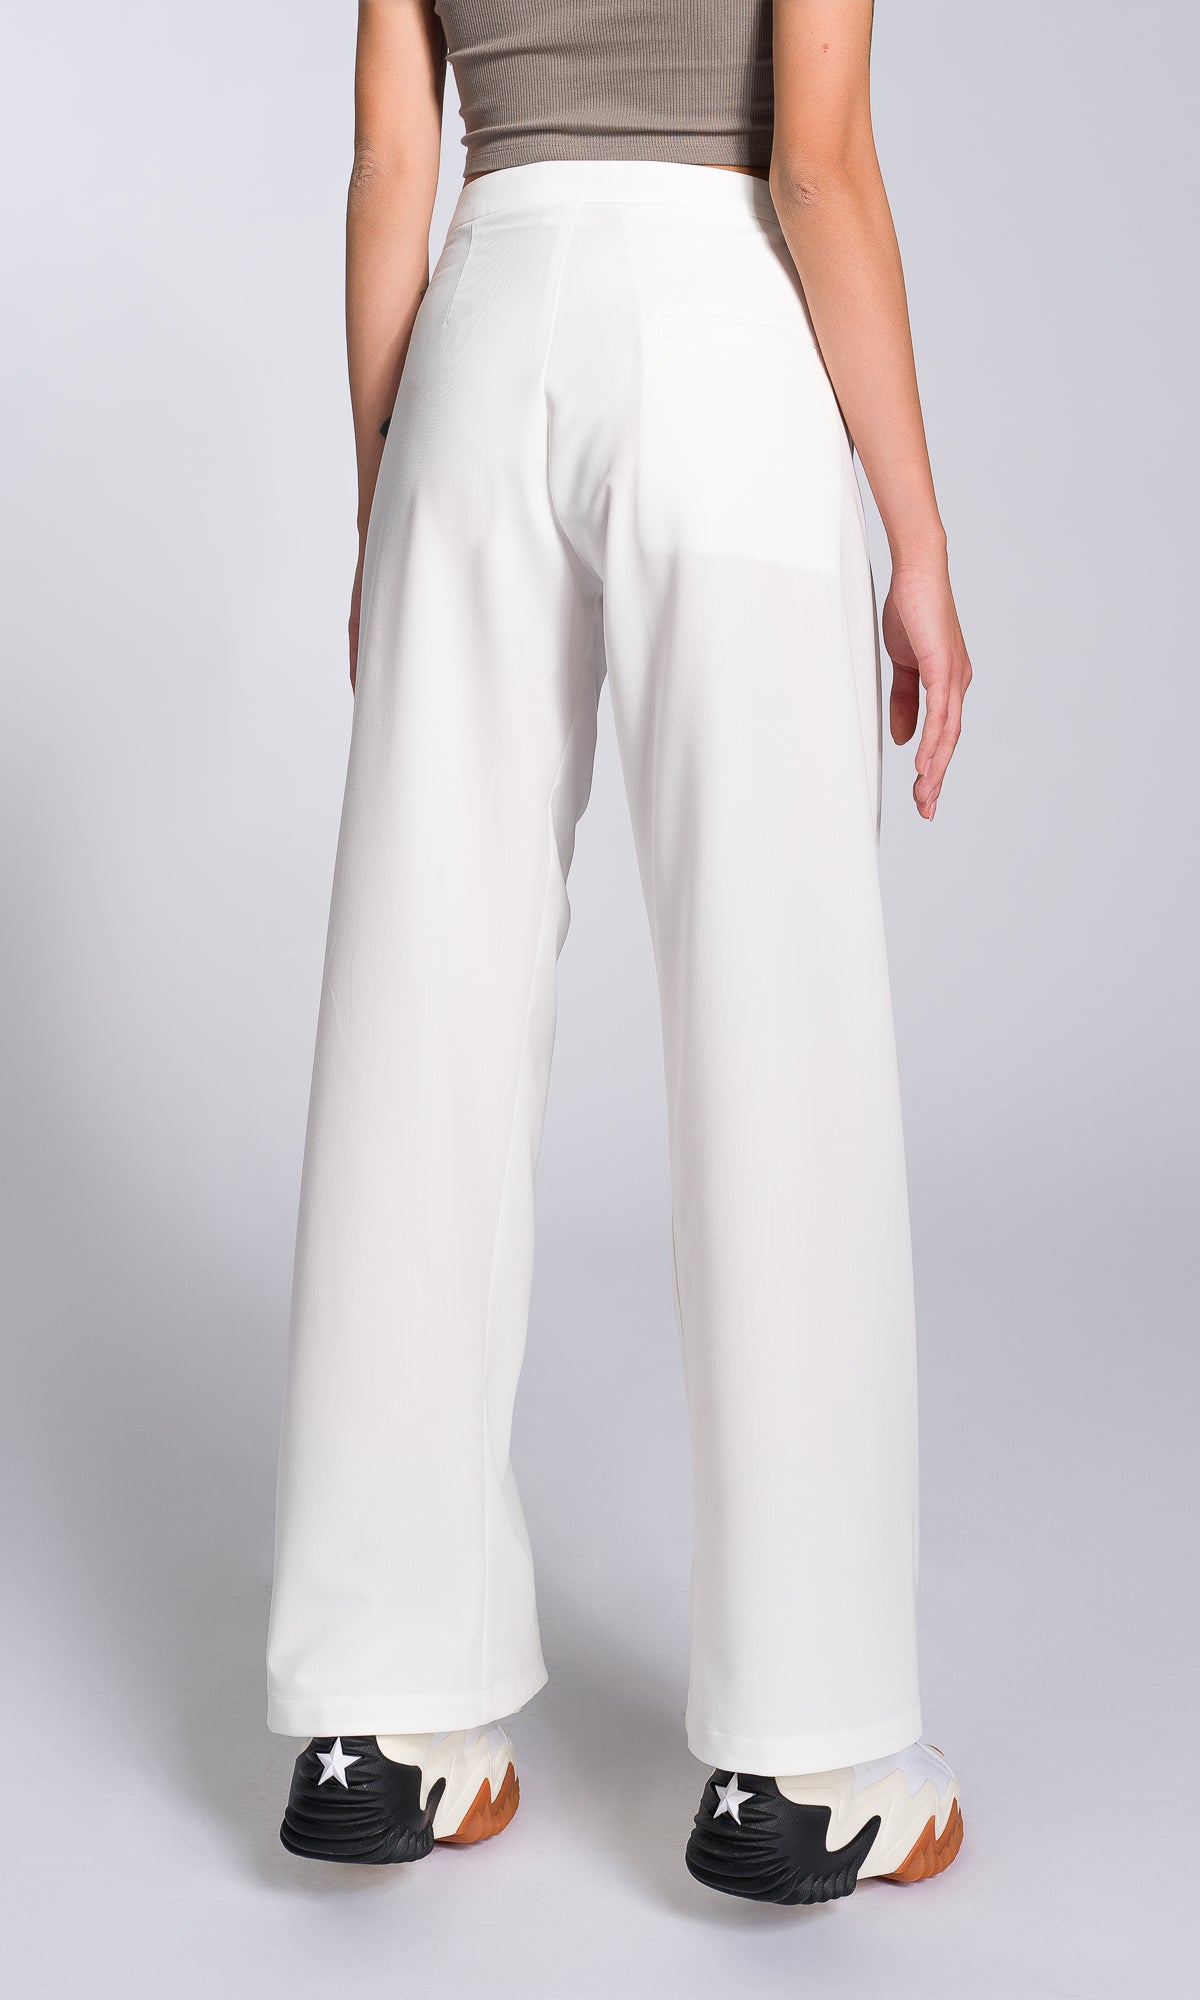 Two-piece Set of Asymmetric Buttoned Blazer and Wide Leg Pants